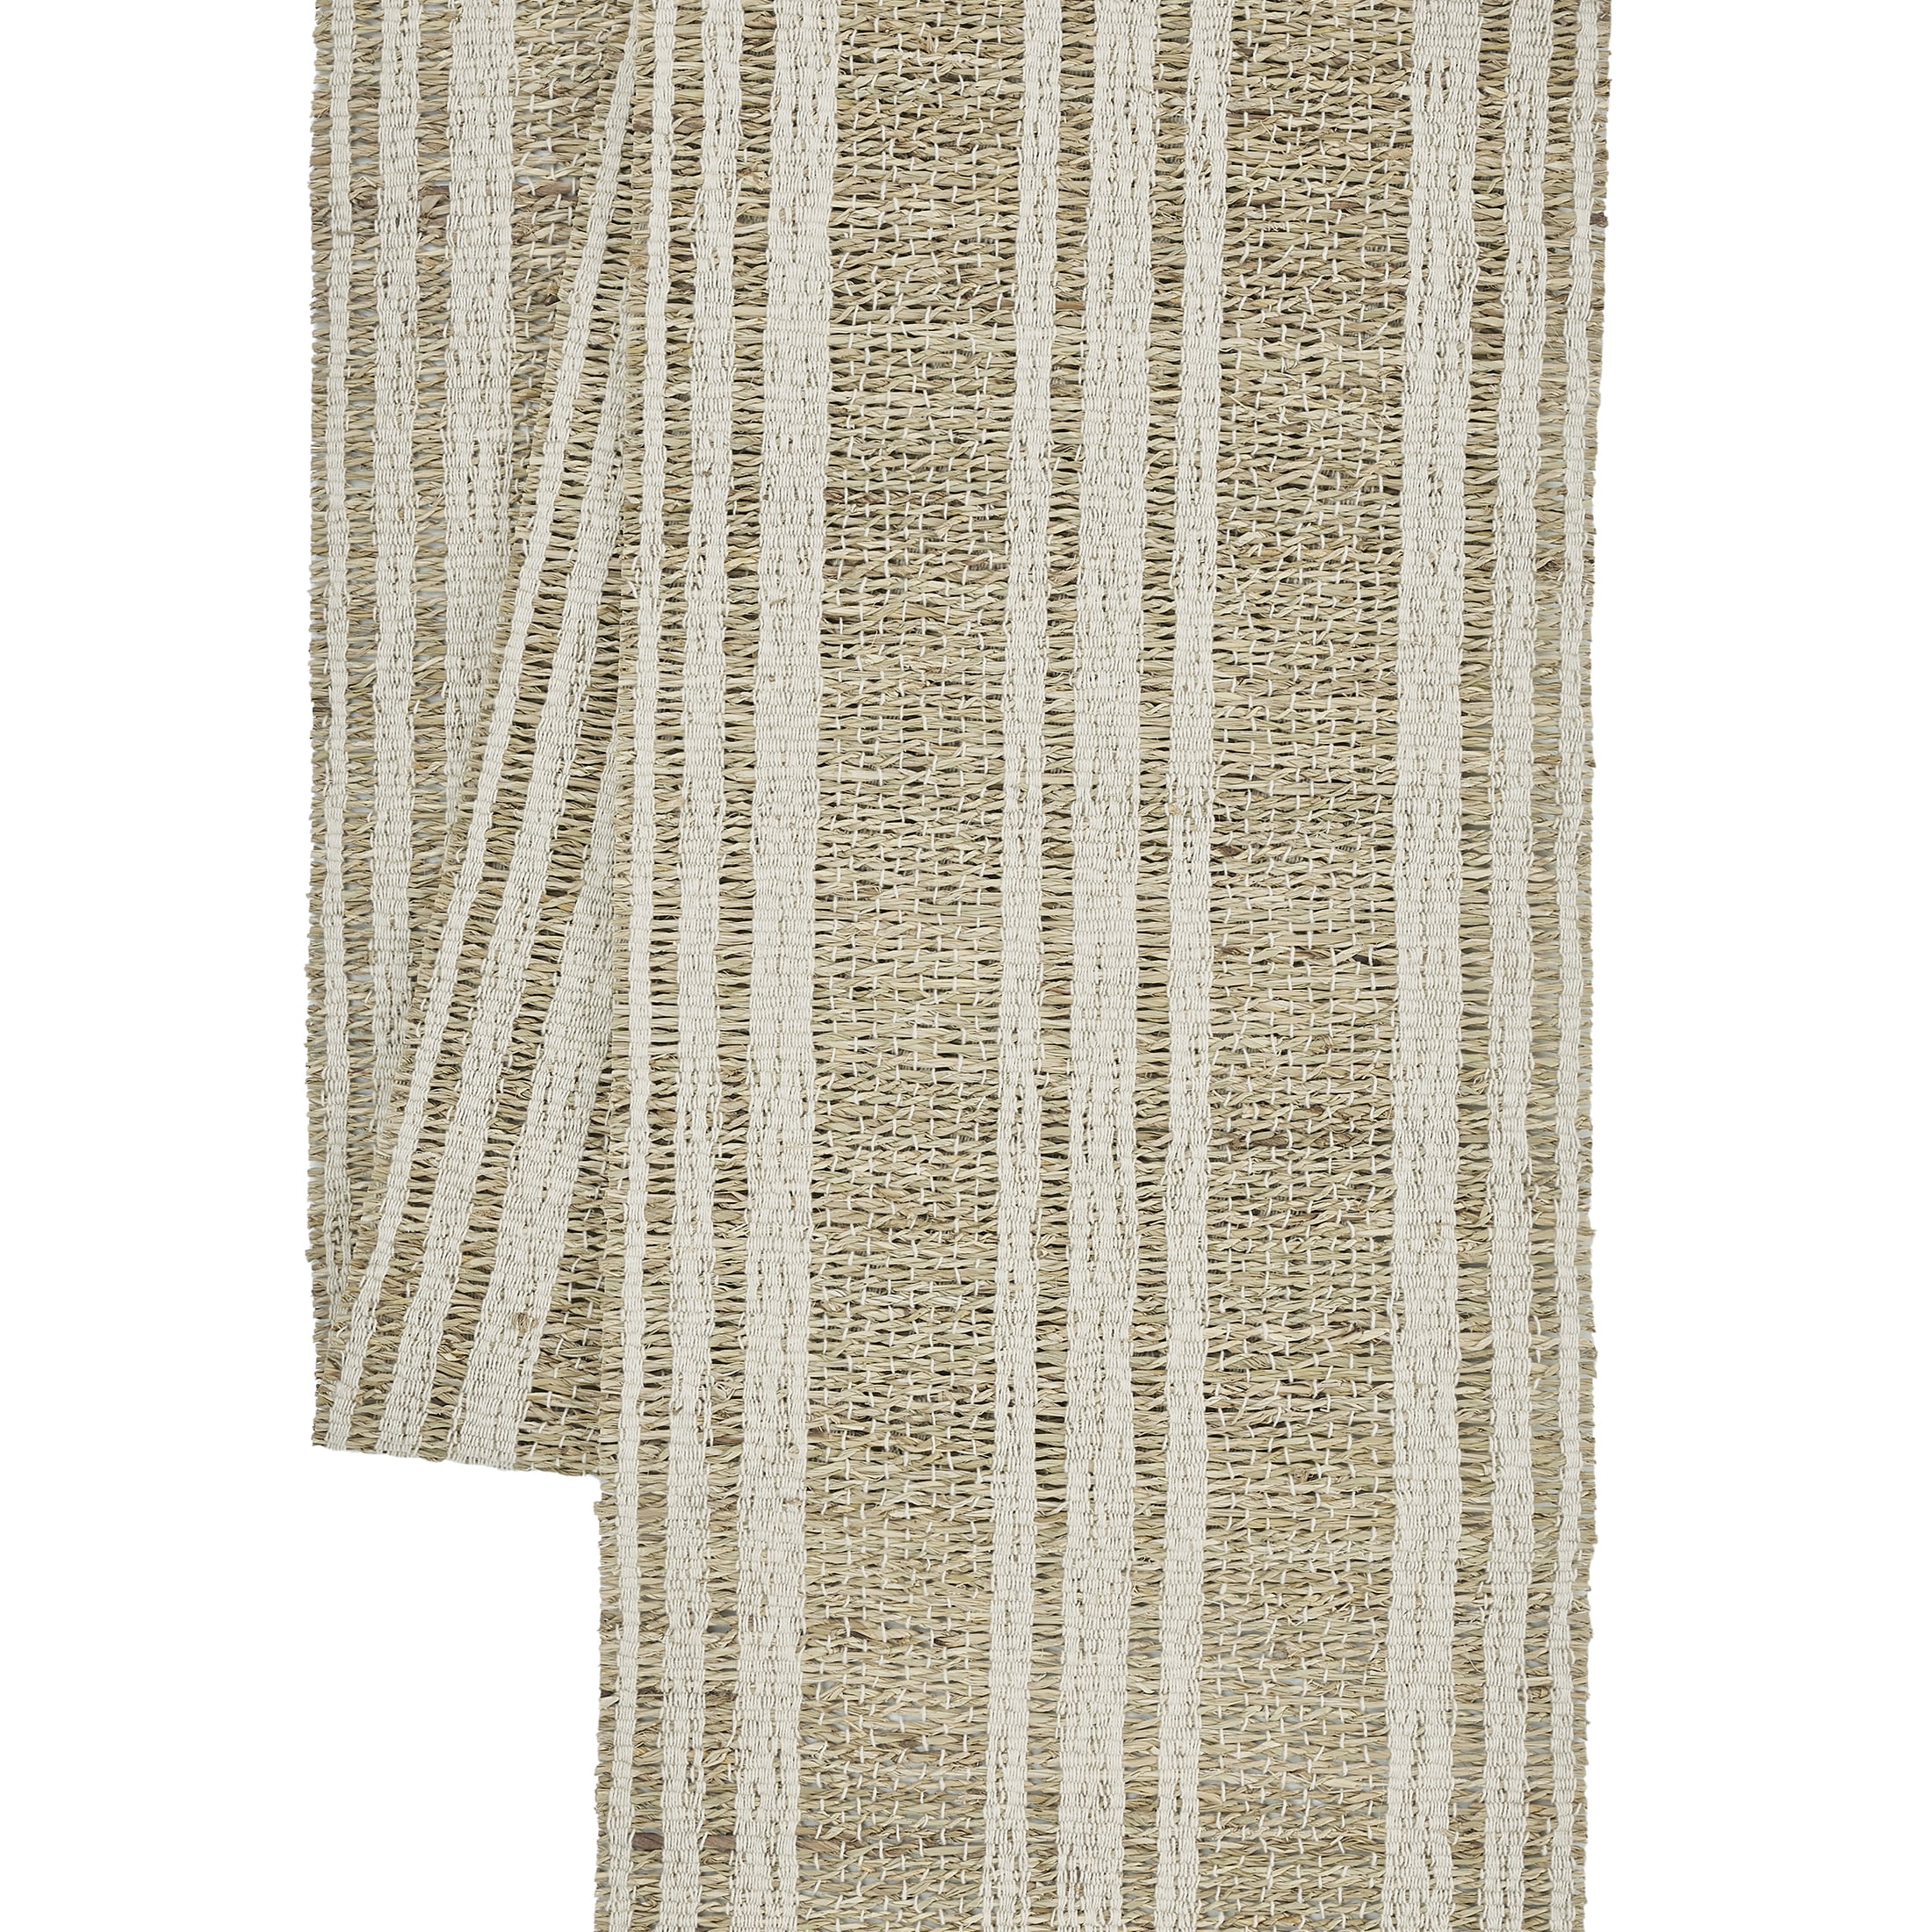 My Texas House Declan Seagrass 14" x 90" Table Runner, Natural, 1 Piece